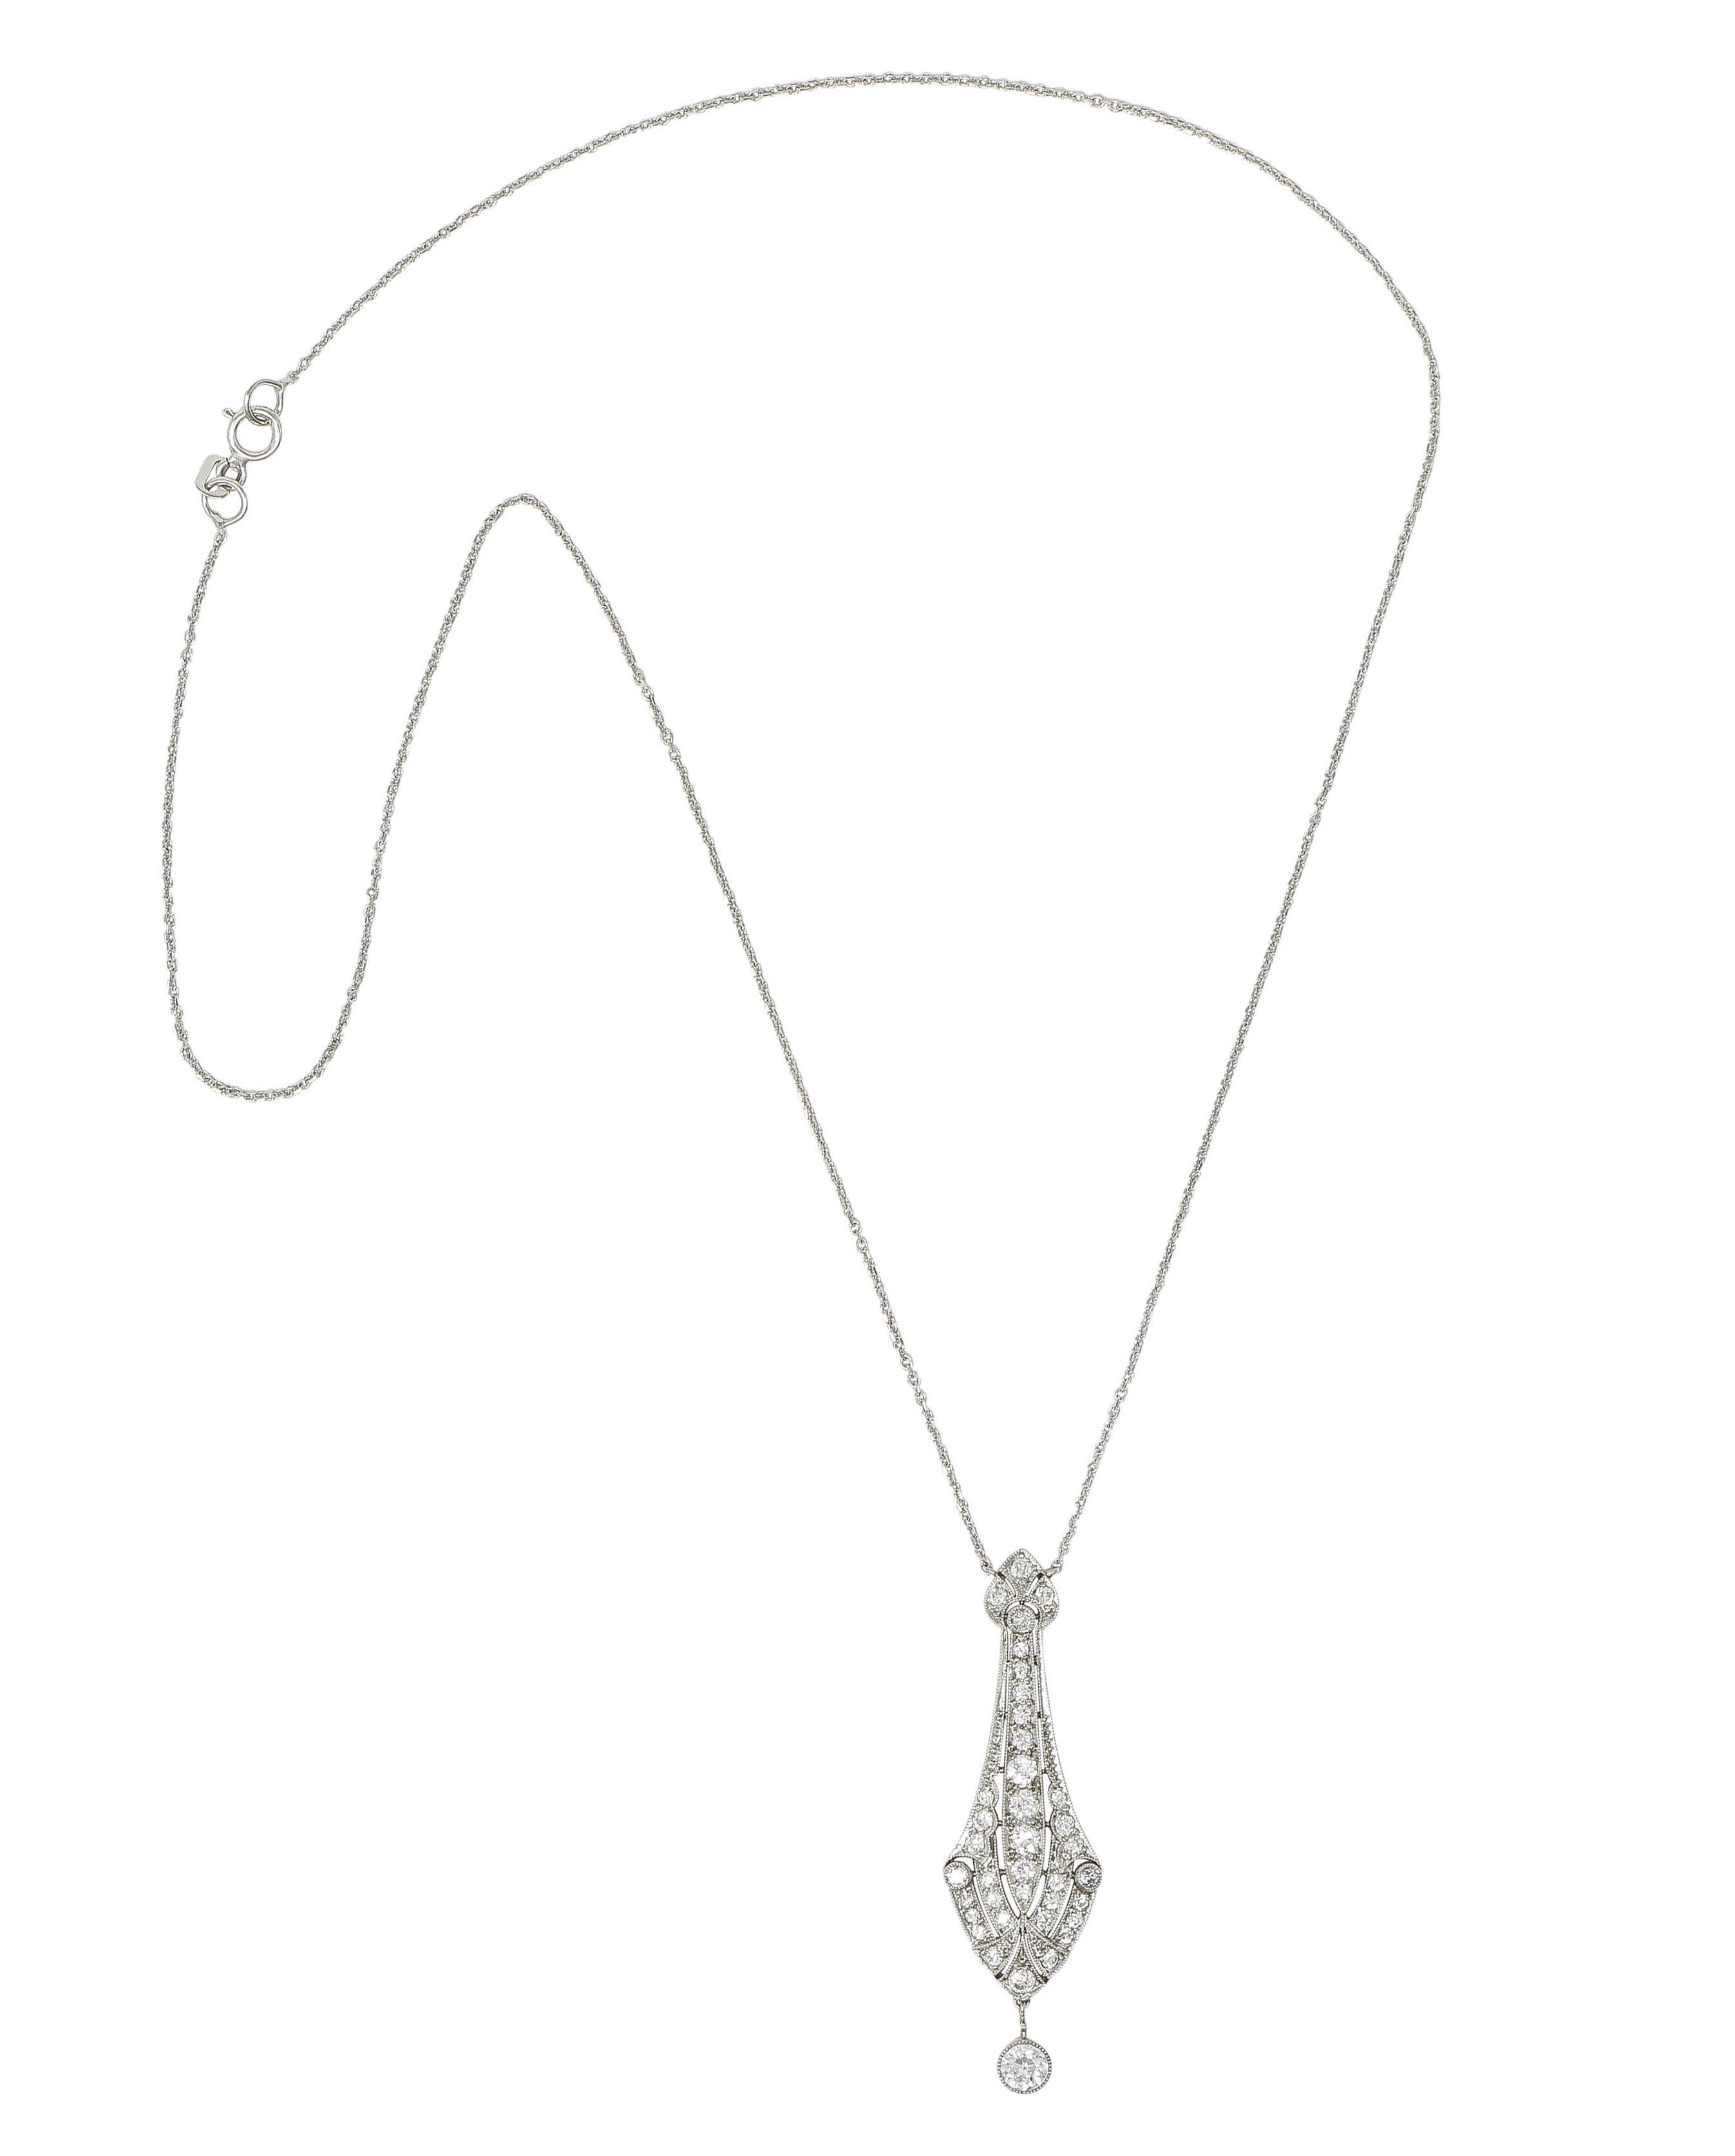 Comprised of 0.5 mm white gold cable link chain suspending an oblong drop pendant 
Pierced with streamlined motifs and bead set with old European cut diamonds 
Weighing approximately 0.62 carat total - G color with VS2 clarity
Suspending an